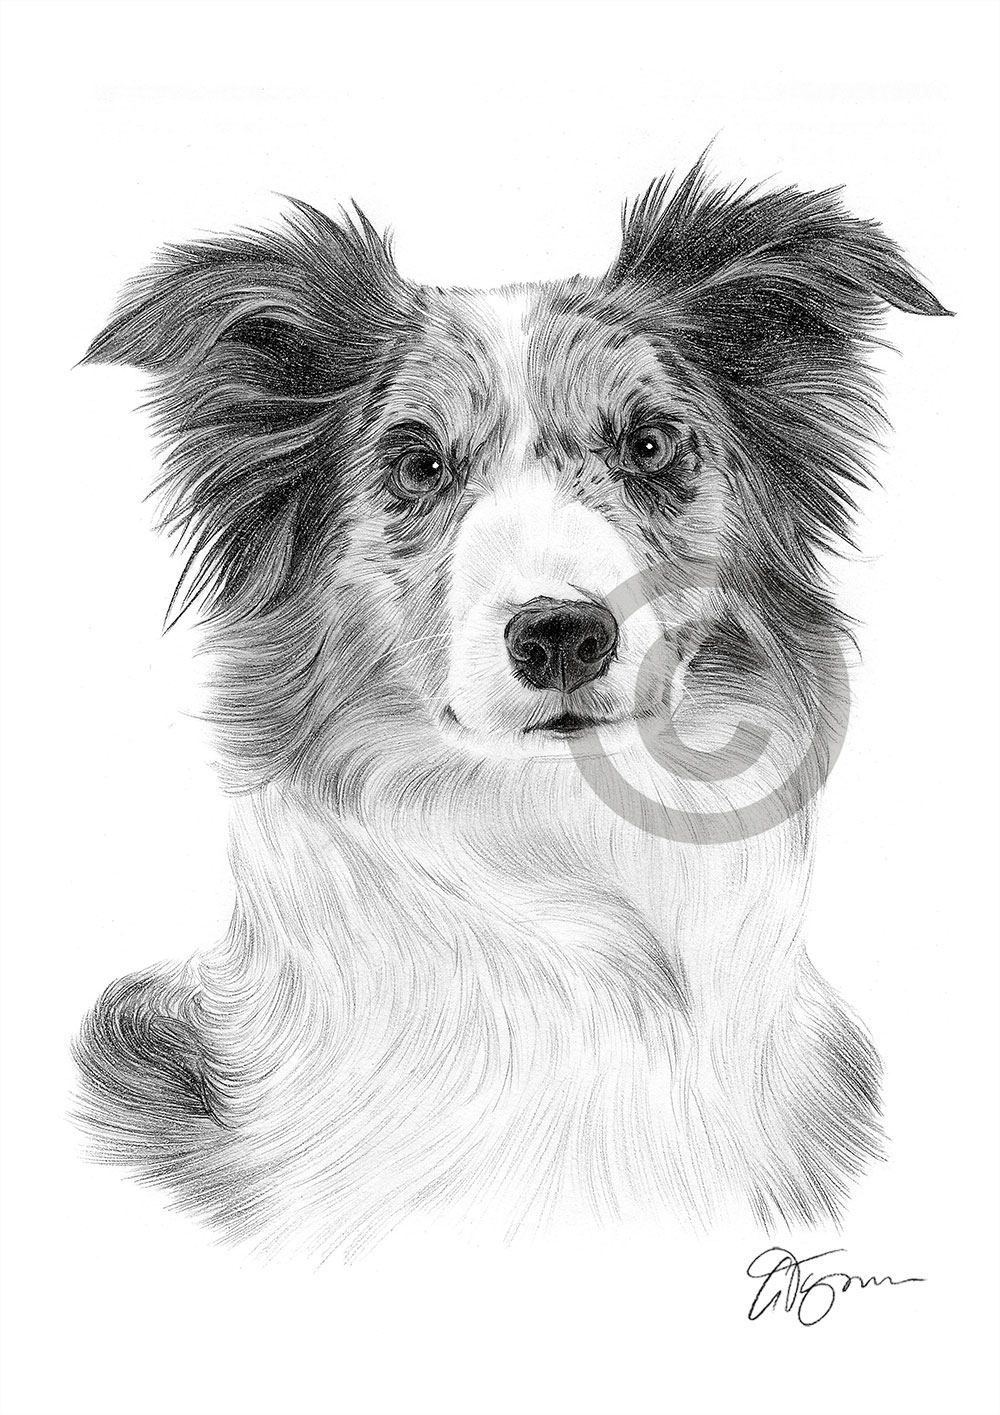 Pencil drawing of a Blue Merle Border Collie by artist Gary Tymon